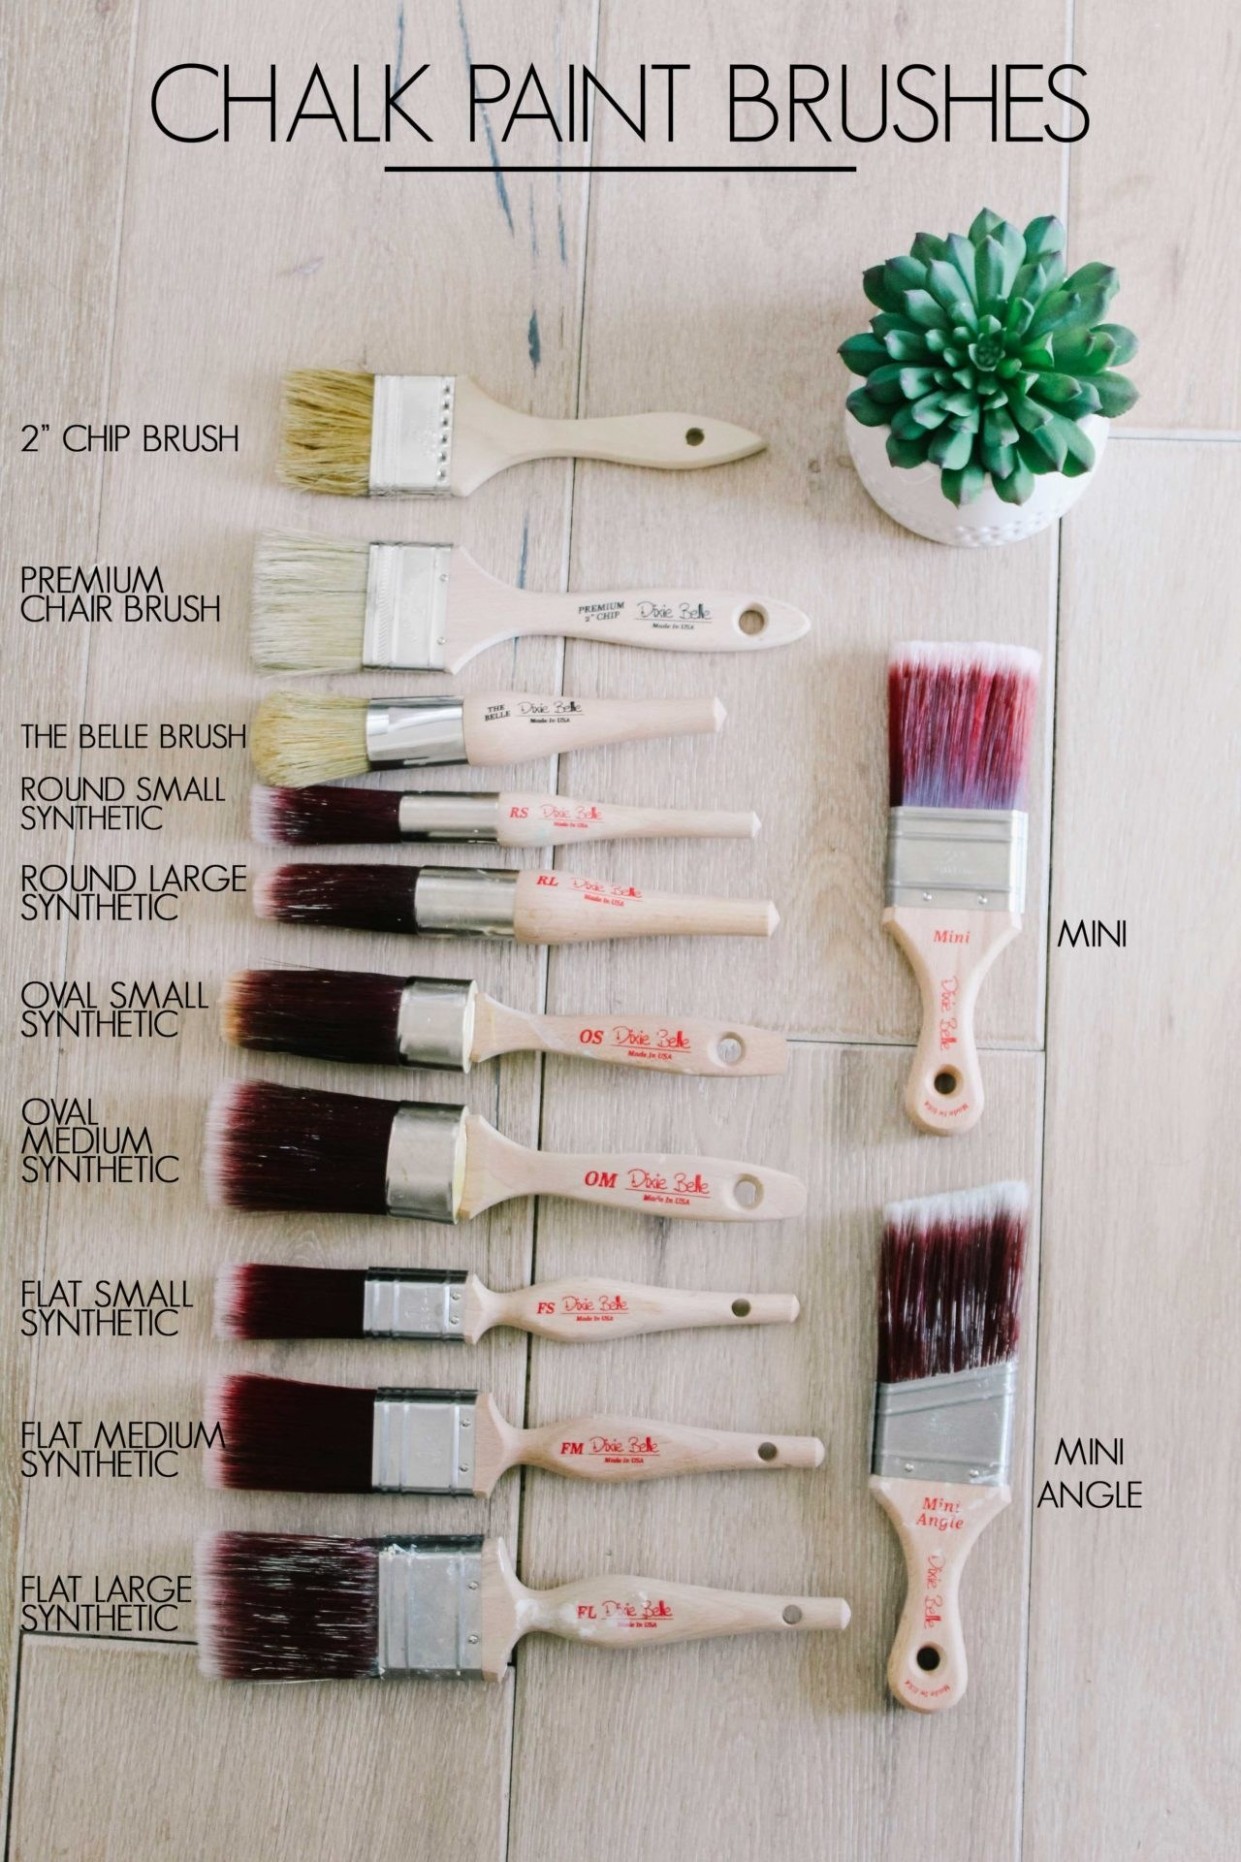 Supplies Needed To Chalk Paint At Home With Ashley Where To Buy Chalk Paint